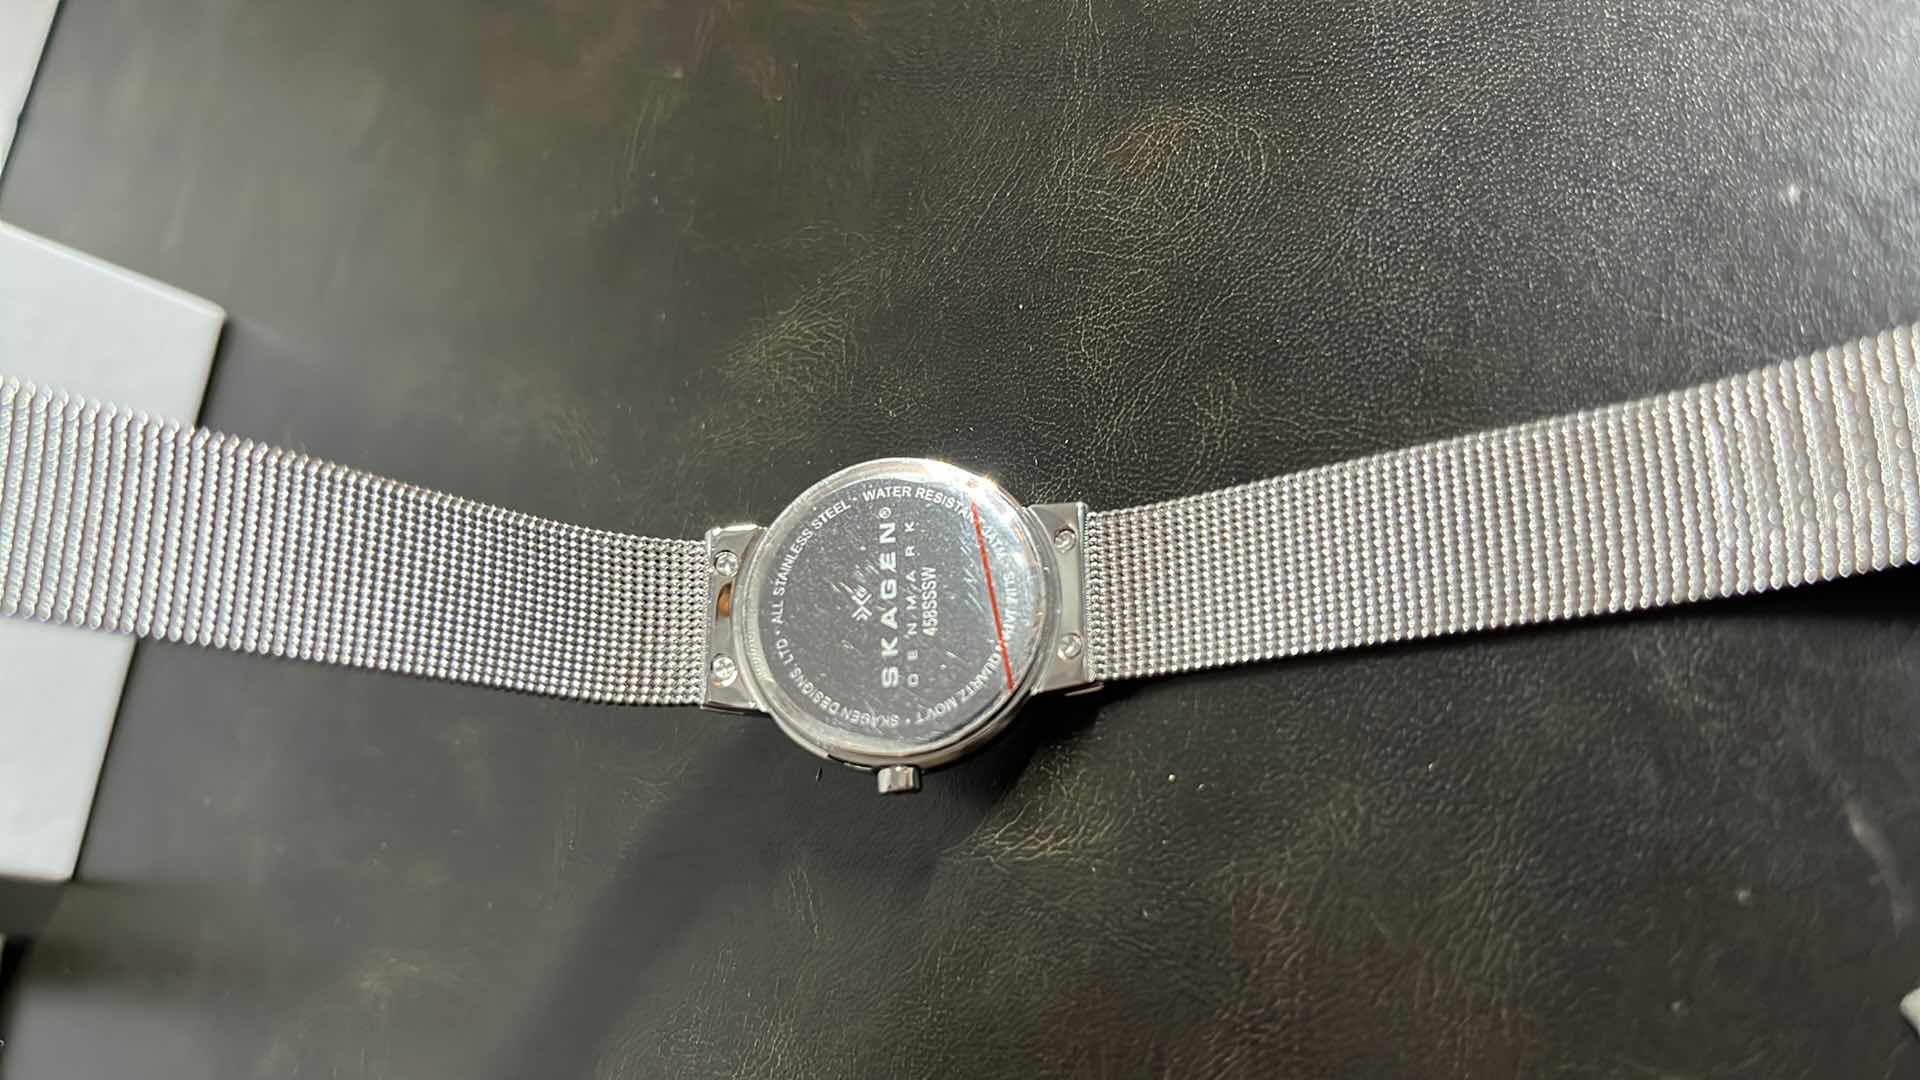 Photo 5 of NEW WOMENS SKAGEN DENMARK WATCH W STAINLESS STEEL CASE & MESH BAND, MOTHER OF PEARL INLAY & SWAROVSKI CRYSTALS, INCLUDES ORIGINAL BOX MODEL 458SSSW